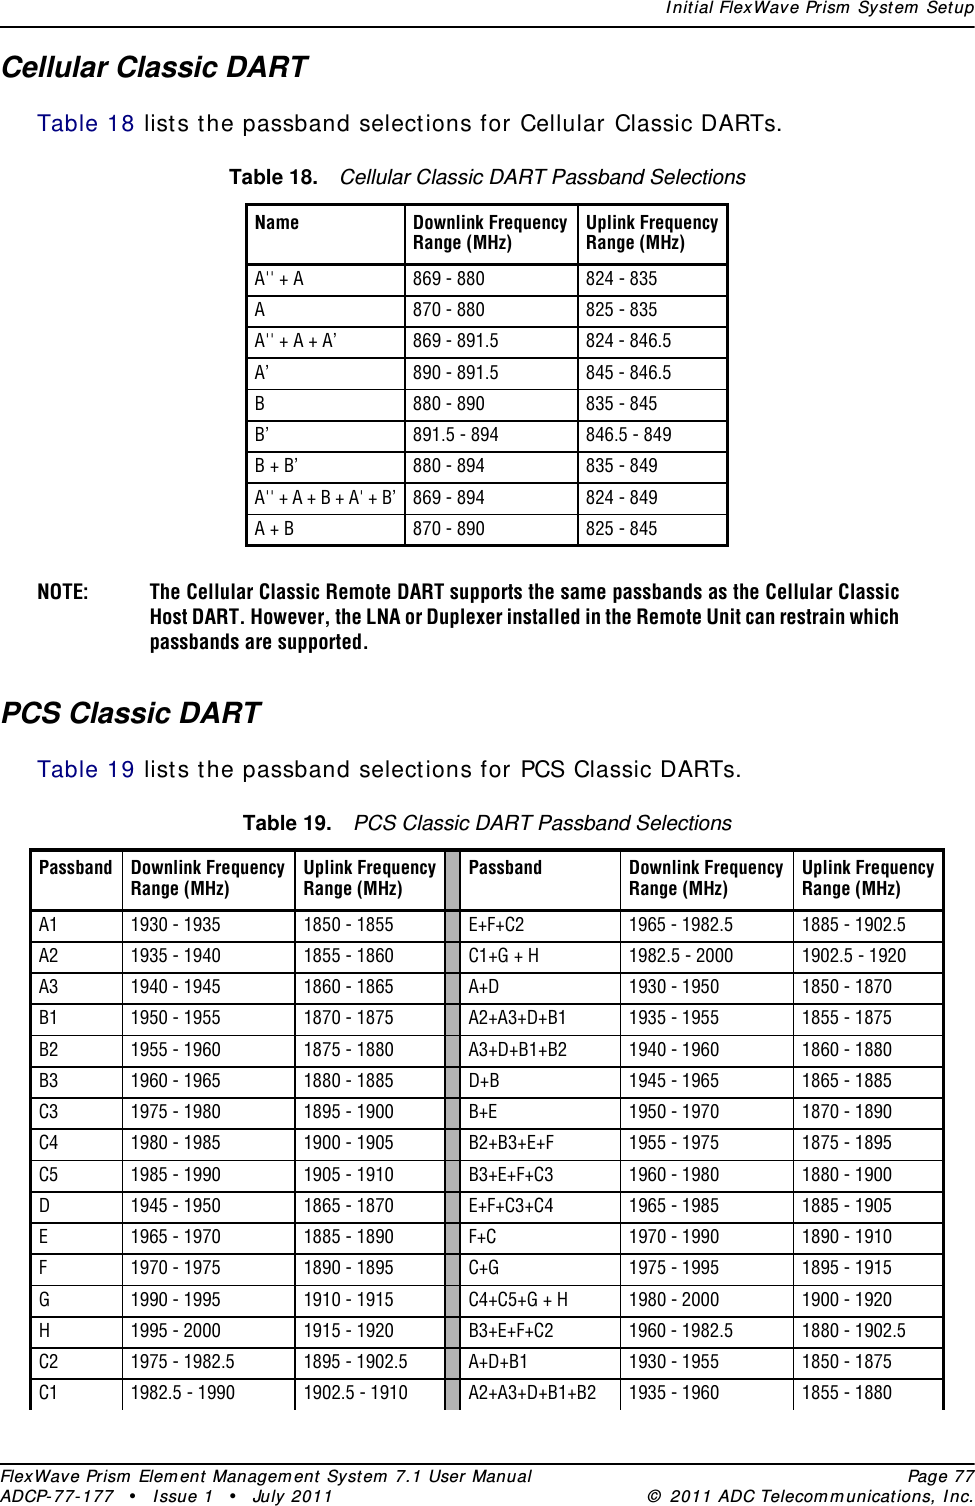 I nit ial FlexWave Prism  System  SetupFlexWave Prism  Elem ent  Managem ent Syst em  7.1 User Manual Page 77ADCP- 77- 1 77  • Issue 1 • July 2011 ©  2011 ADC Telecom m unicat ions, I nc.Cellular Classic DARTTable 18 lists the passband select ions for Cellular Classic DARTs.NOTE: The Cellular Classic Remote DART supports the same passbands as the Cellular Classic Host DART. However, the LNA or Duplexer installed in the Remote Unit can restrain which passbands are supported. PCS Classic DARTTable 19 lists the passband select ions for PCS Classic DARTs.Table 18. Cellular Classic DART Passband SelectionsName Downlink FrequencyRange (MHz)Uplink FrequencyRange (MHz)A&apos;&apos; + A 869 - 880 824 - 835A870 - 880 825 - 835A&apos;&apos; + A + A’ 869 - 891.5 824 - 846.5A’ 890 - 891.5 845 - 846.5B880 - 890 835 - 845B’ 891.5 - 894 846.5 - 849B + B’ 880 - 894 835 - 849A&apos;&apos; + A + B + A&apos; + B’ 869 - 894 824 - 849A + B 870 - 890 825 - 845Table 19. PCS Classic DART Passband SelectionsPassband Downlink FrequencyRange (MHz)Uplink FrequencyRange (MHz)Passband Downlink FrequencyRange (MHz)Uplink FrequencyRange (MHz)A1 1930 - 1935 1850 - 1855 E+F+C2 1965 - 1982.5 1885 - 1902.5A2 1935 - 1940 1855 - 1860 C1+G + H 1982.5 - 2000 1902.5 - 1920A3 1940 - 1945 1860 - 1865 A+D 1930 - 1950 1850 - 1870B1 1950 - 1955 1870 - 1875 A2+A3+D+B1 1935 - 1955 1855 - 1875B2 1955 - 1960 1875 - 1880 A3+D+B1+B2 1940 - 1960 1860 - 1880B3 1960 - 1965 1880 - 1885 D+B 1945 - 1965 1865 - 1885C3 1975 - 1980 1895 - 1900 B+E 1950 - 1970 1870 - 1890C4 1980 - 1985 1900 - 1905 B2+B3+E+F 1955 - 1975 1875 - 1895C5 1985 - 1990 1905 - 1910 B3+E+F+C3 1960 - 1980 1880 - 1900D1945 - 1950 1865 - 1870 E+F+C3+C4 1965 - 1985 1885 - 1905E1965 - 1970 1885 - 1890 F+C 1970 - 1990 1890 - 1910F1970 - 1975 1890 - 1895 C+G 1975 - 1995 1895 - 1915G1990 - 1995 1910 - 1915 C4+C5+G + H 1980 - 2000 1900 - 1920H1995 - 2000 1915 - 1920 B3+E+F+C2 1960 - 1982.5 1880 - 1902.5C2 1975 - 1982.5 1895 - 1902.5 A+D+B1 1930 - 1955 1850 - 1875C1 1982.5 - 1990 1902.5 - 1910 A2+A3+D+B1+B2 1935 - 1960 1855 - 1880